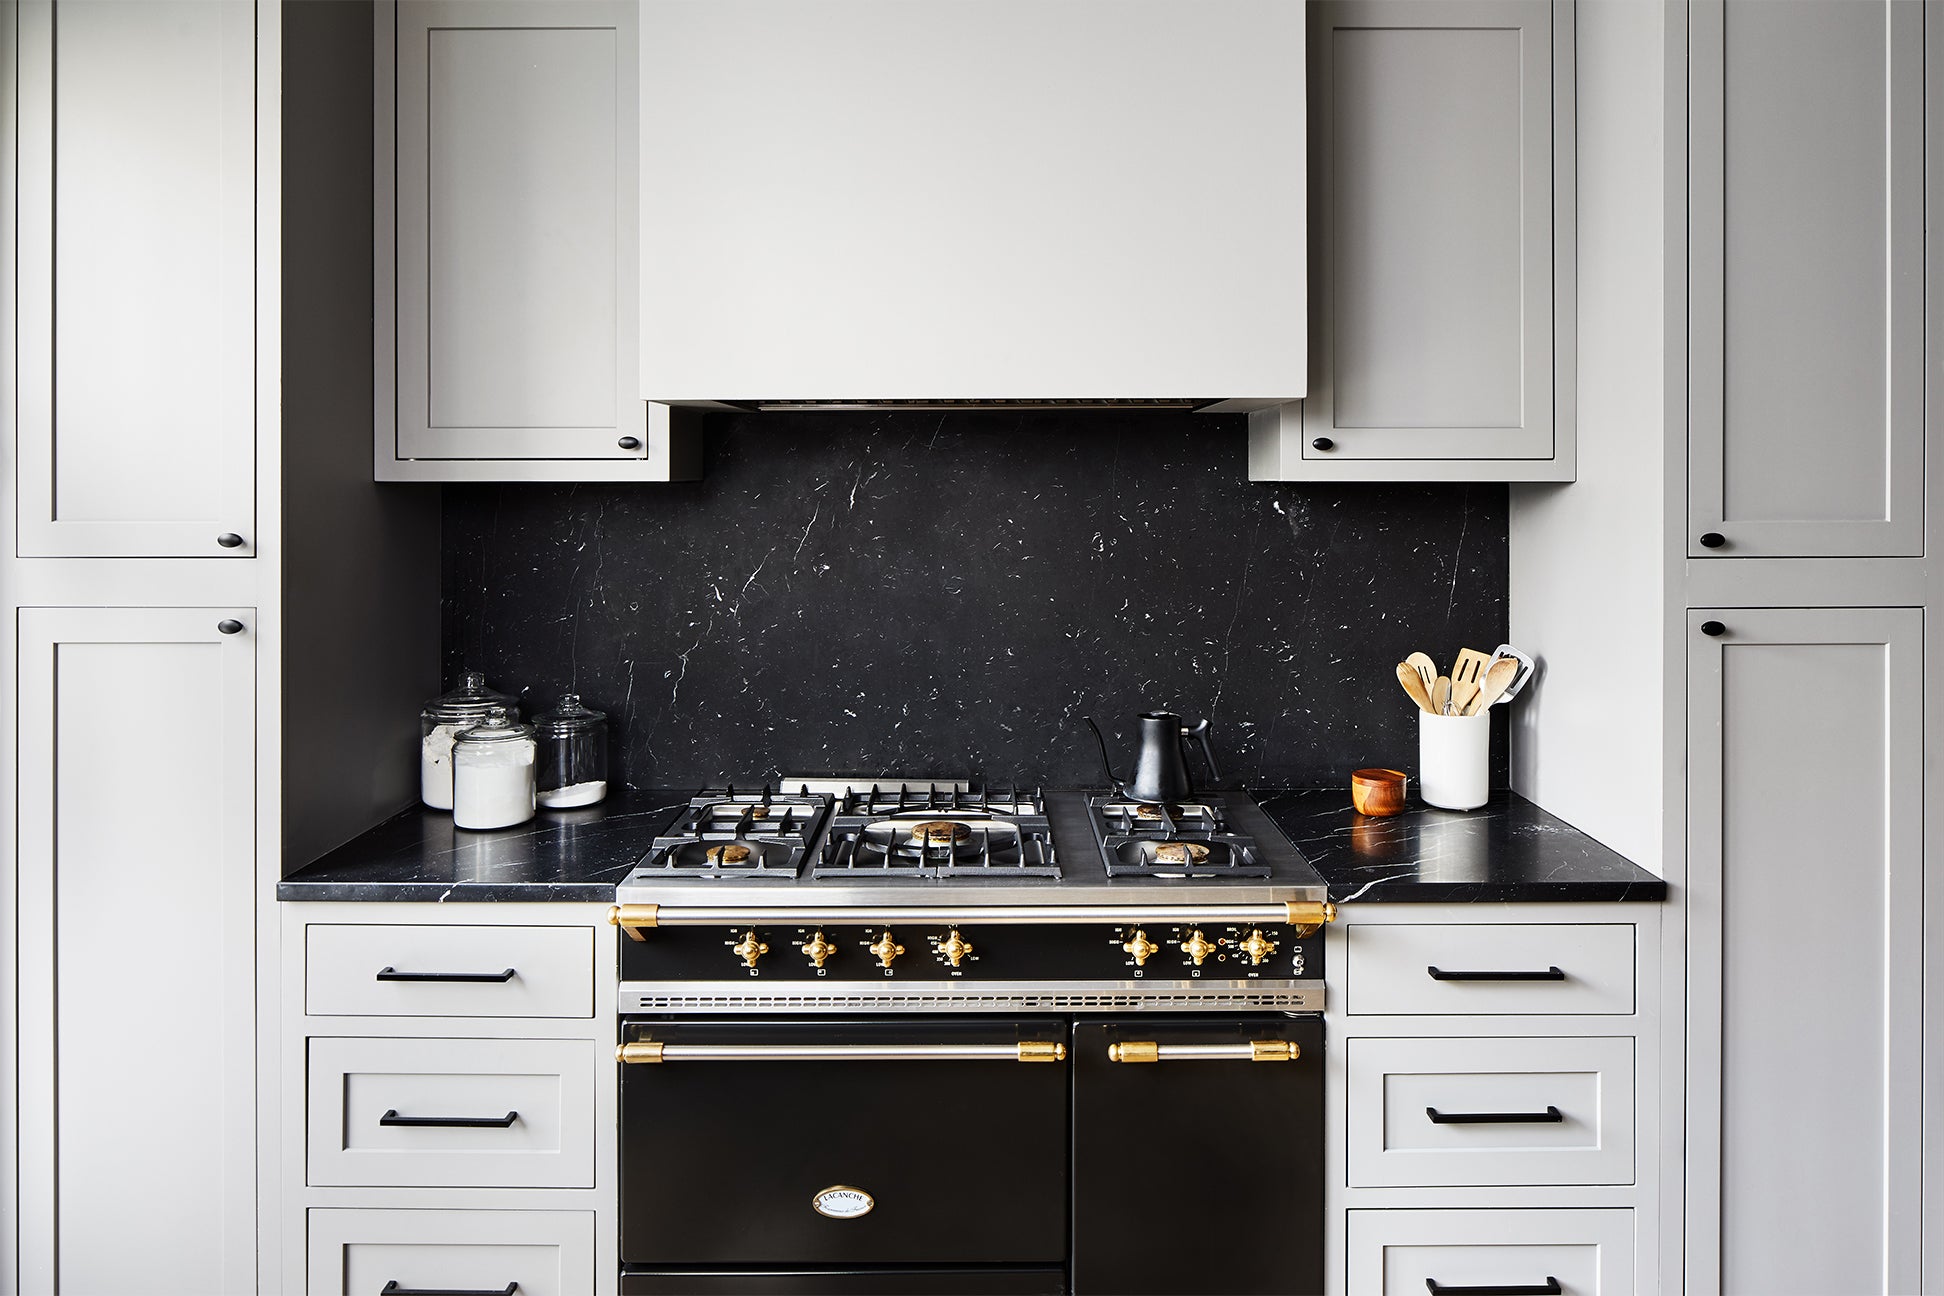 Kitchen with black countertops and Lacanche range